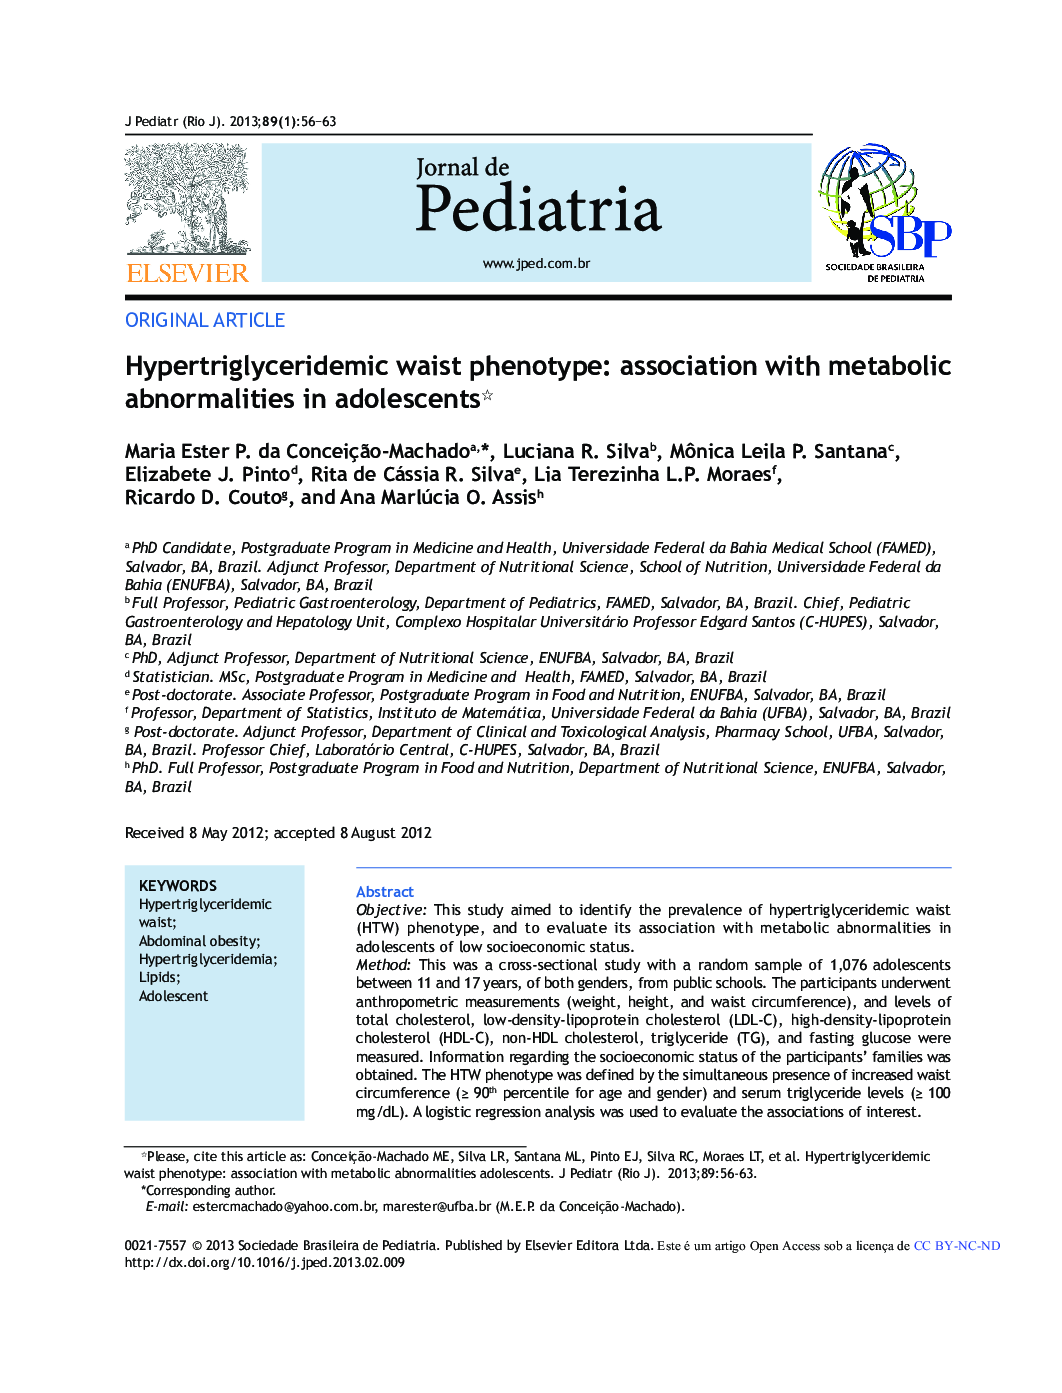 Hypertriglyceridemic Waist Phenotype: Association with Metabolic Abnormalities in Adolescents 